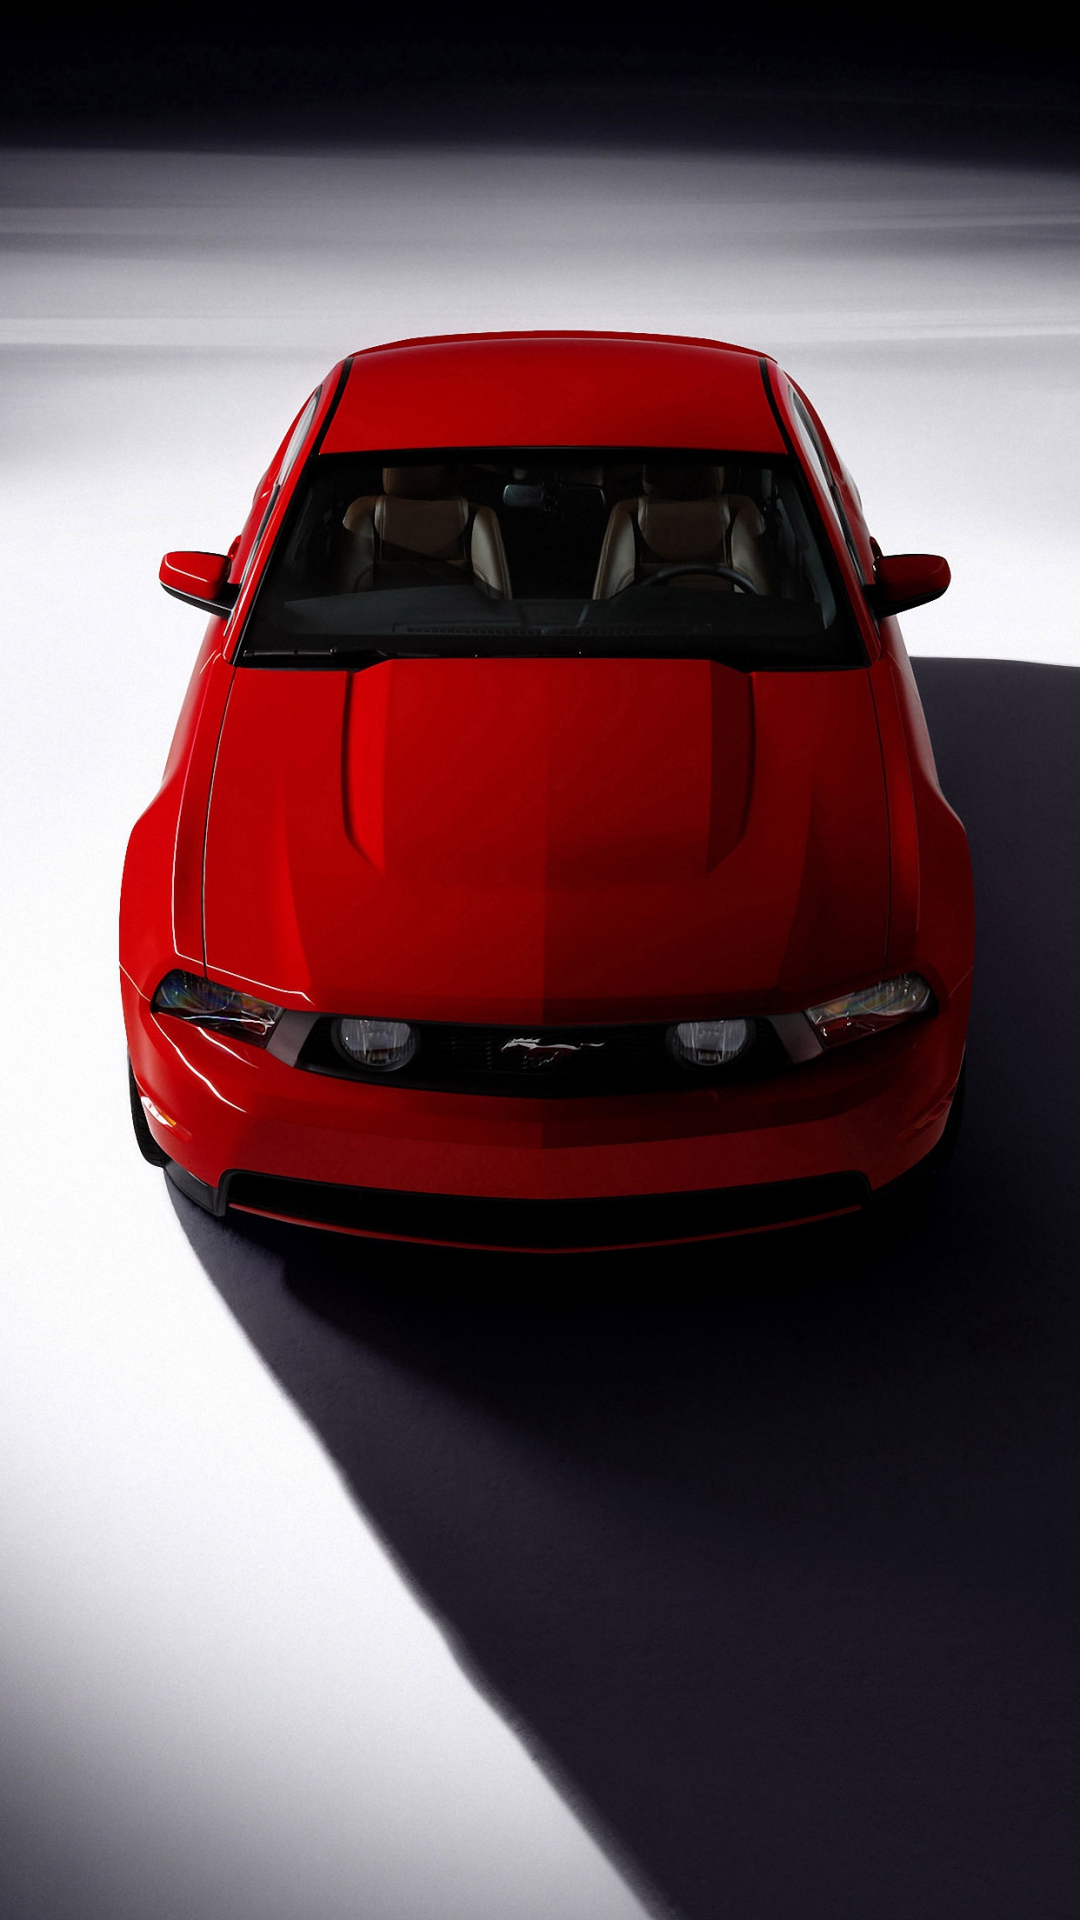 Red Mustang Gt Car Iphone 6 Wallpapers Hd - Mustang Gt Wallpaper For Iphone 7 - HD Wallpaper 